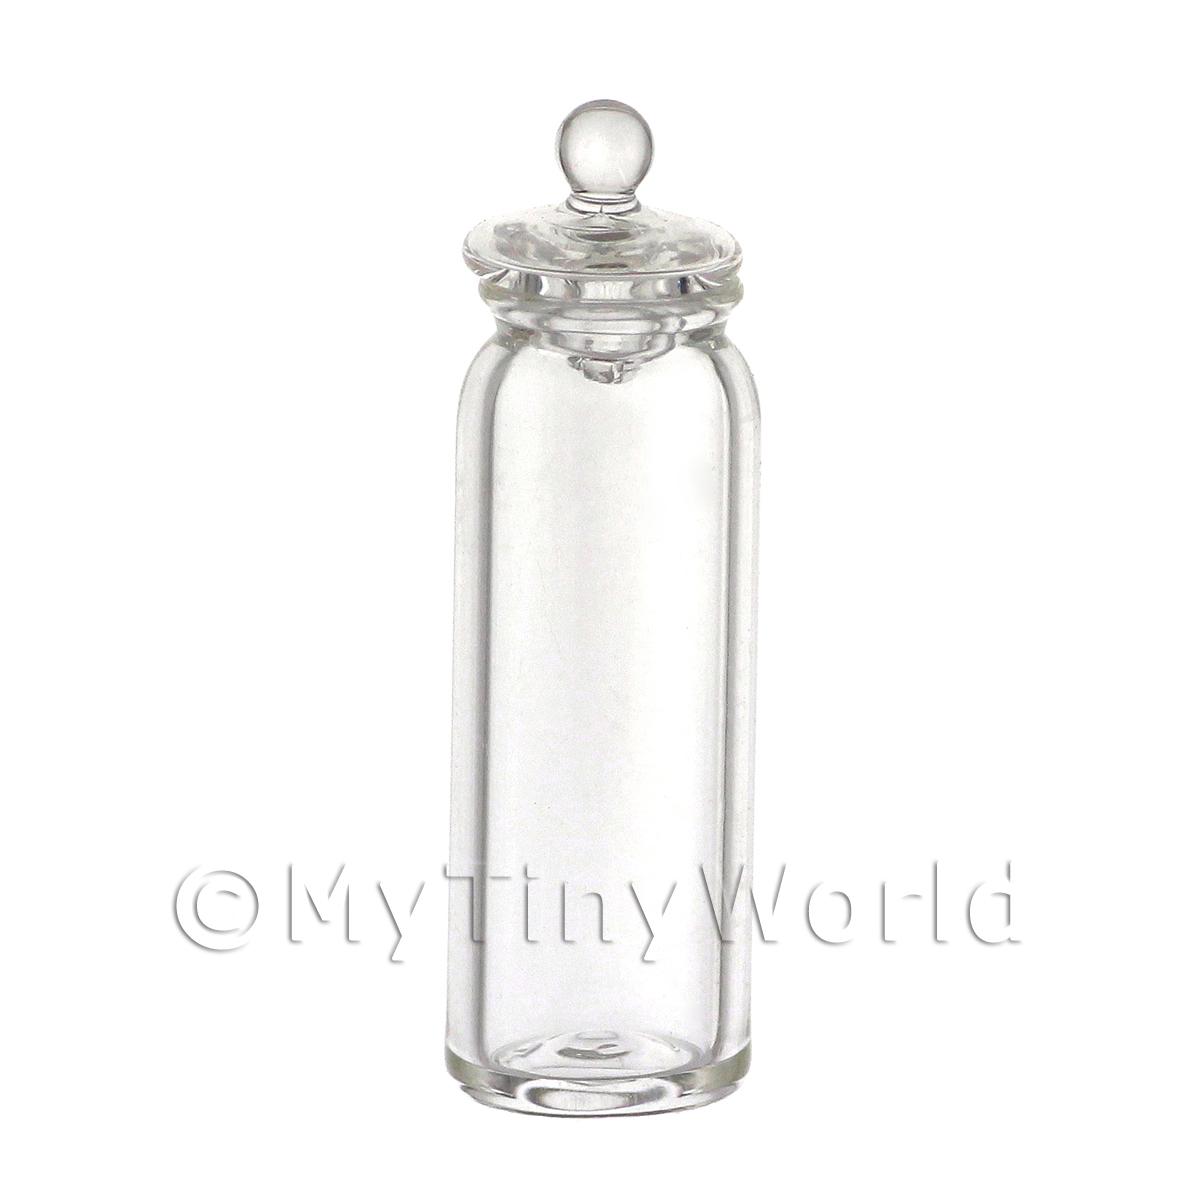 Dolls House Miniature Small Clear Glass Apothecary bottle 